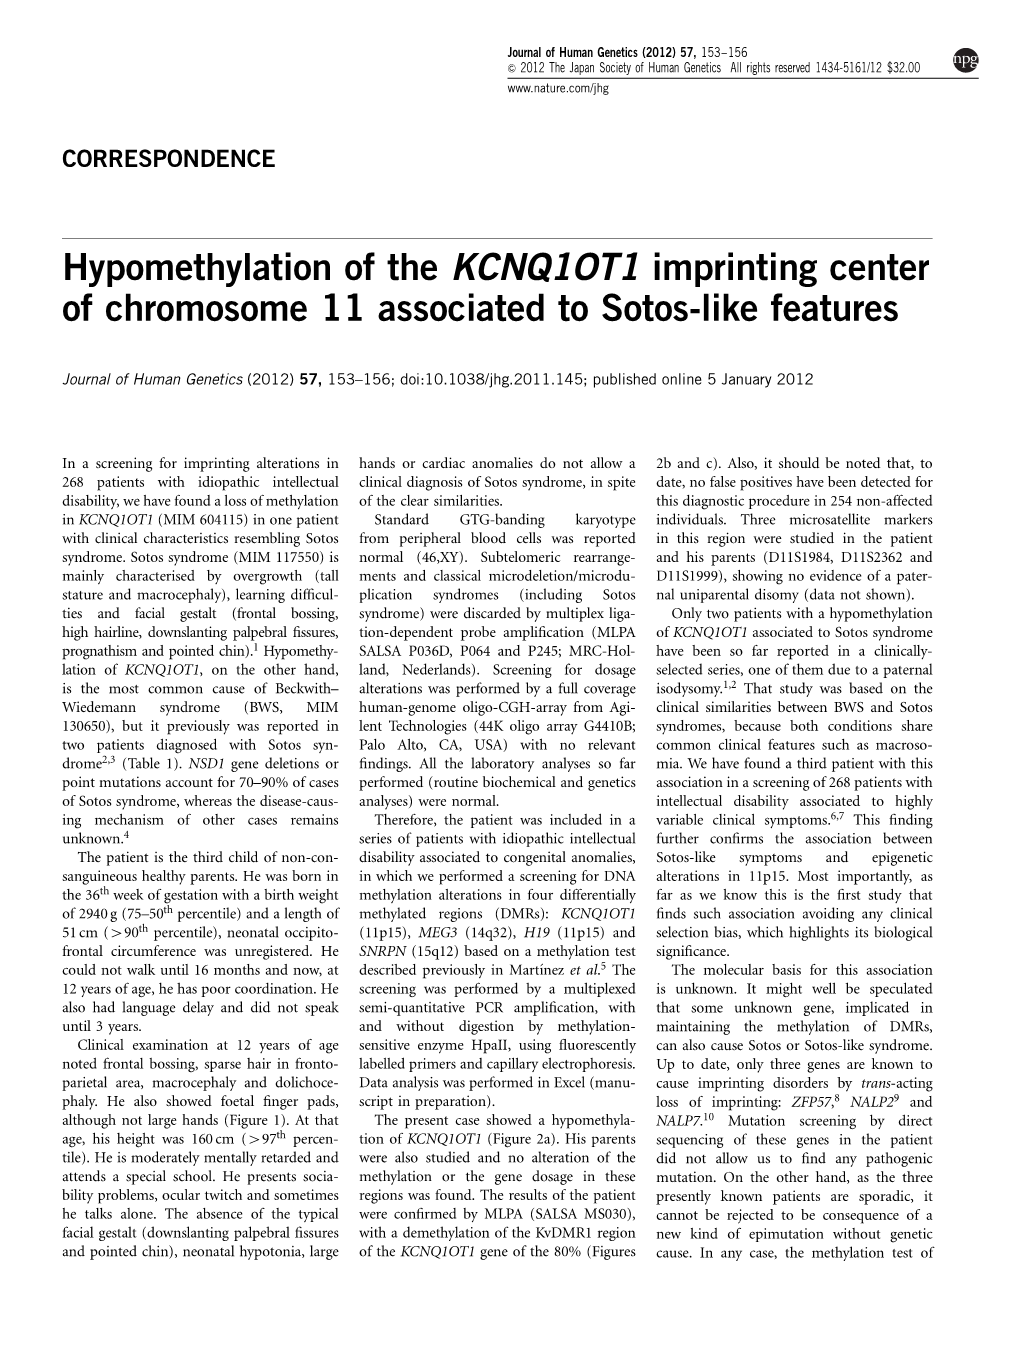 Hypomethylation of the KCNQ1OT1 Imprinting Center of Chromosome 11 Associated to Sotos-Like Features